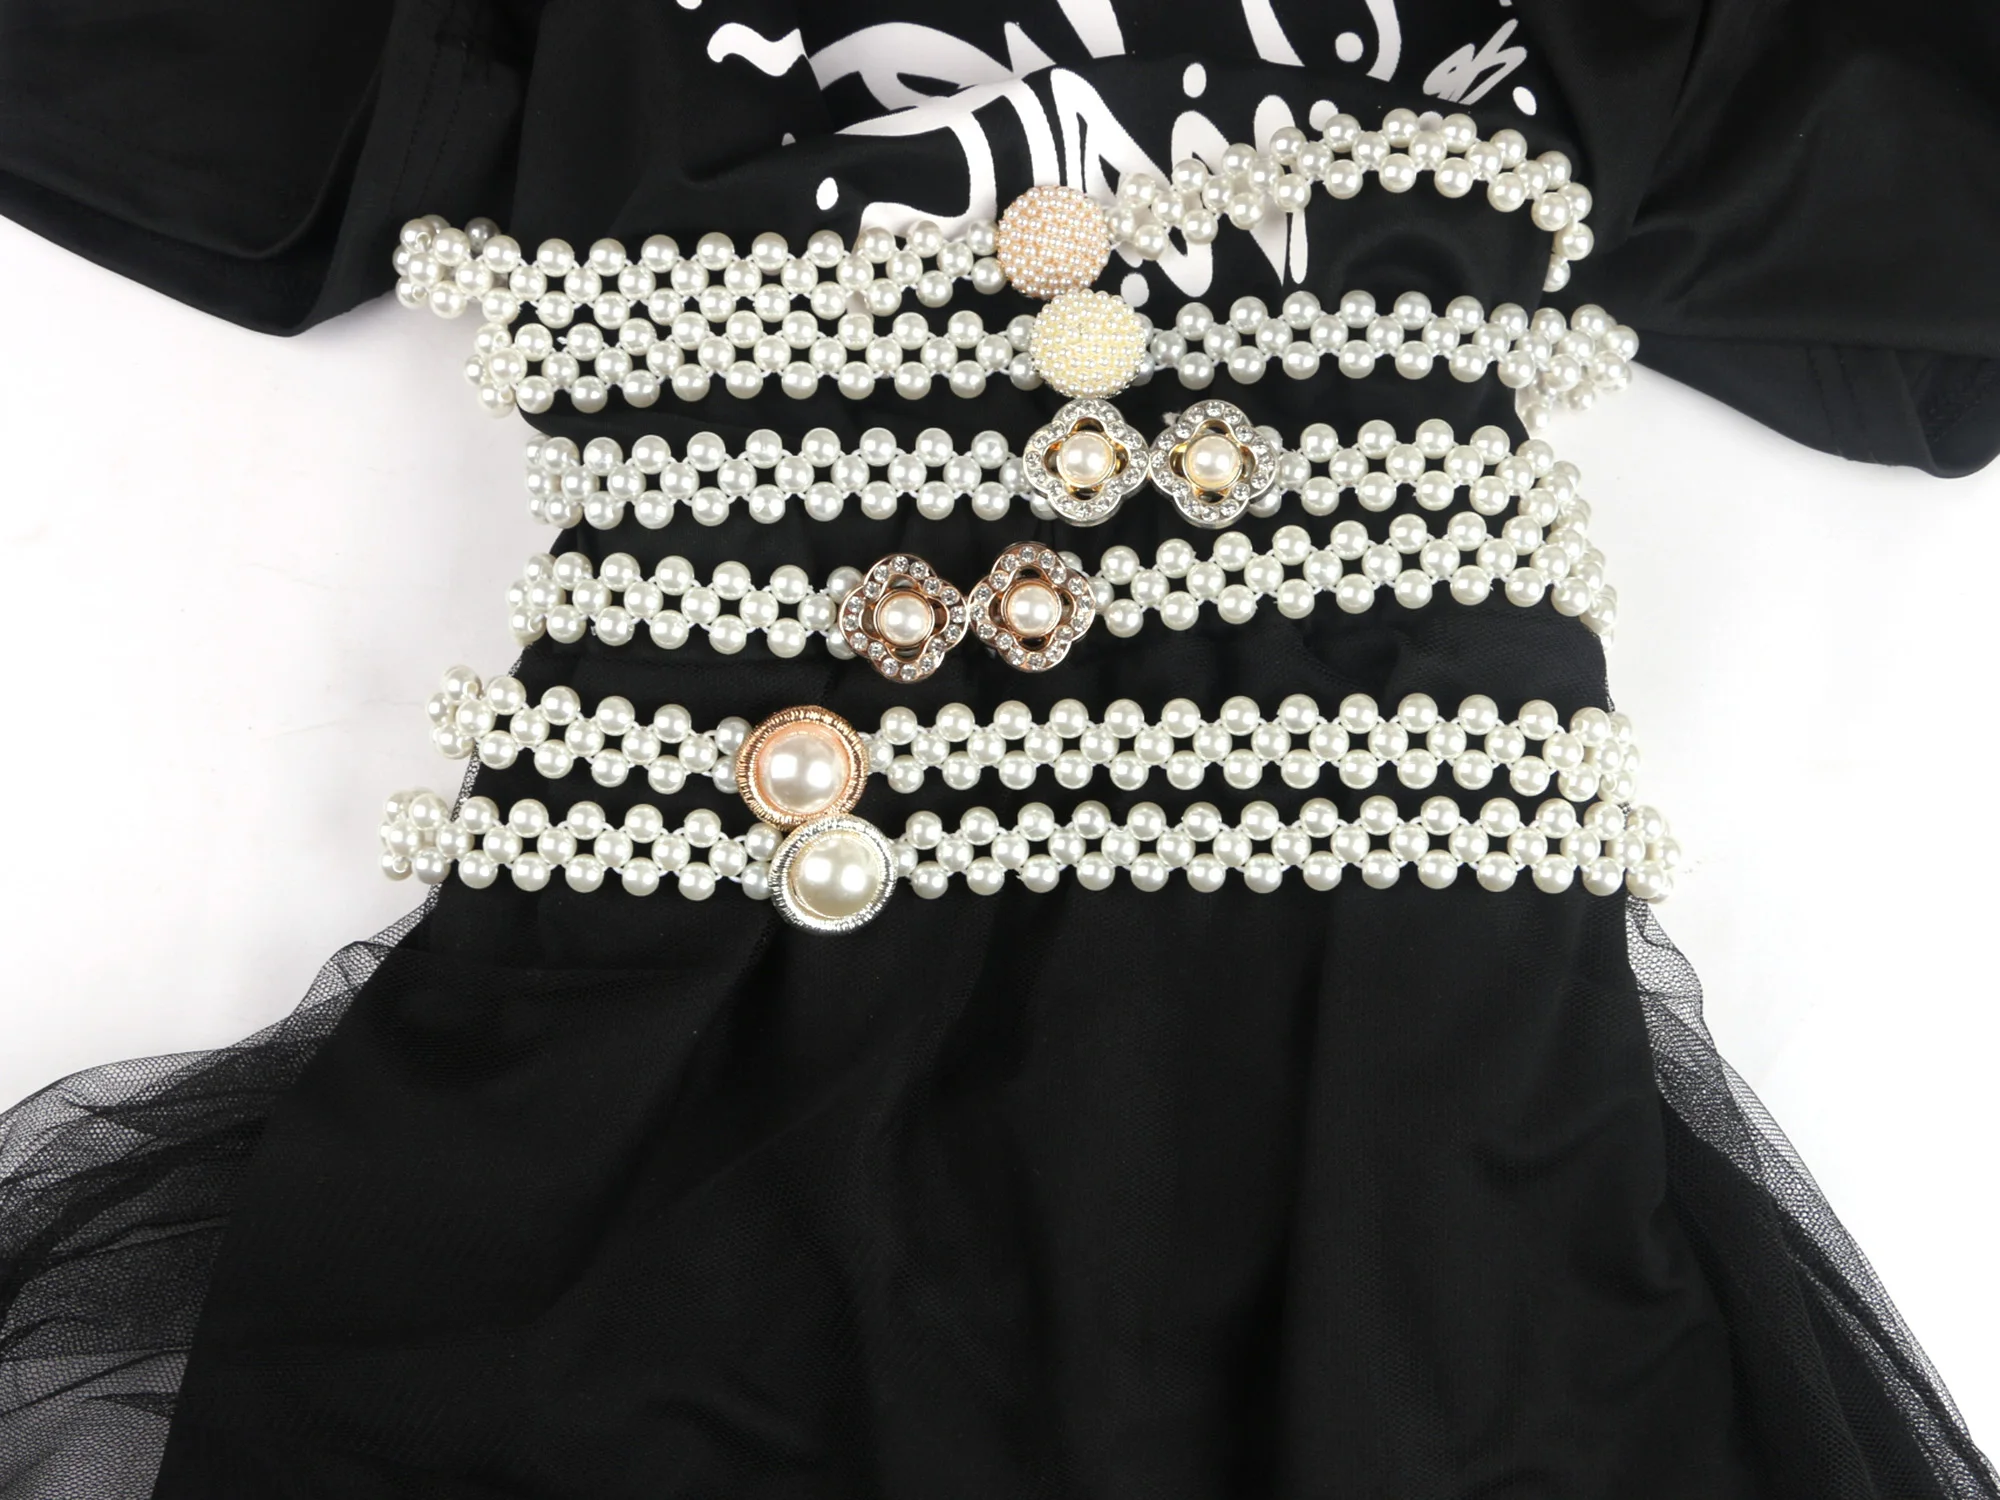 

Elasticity White Pearl Belt for ladies silver/gold beads hook Rhinestone strass buckel rubber band Weave access Waist Decorative